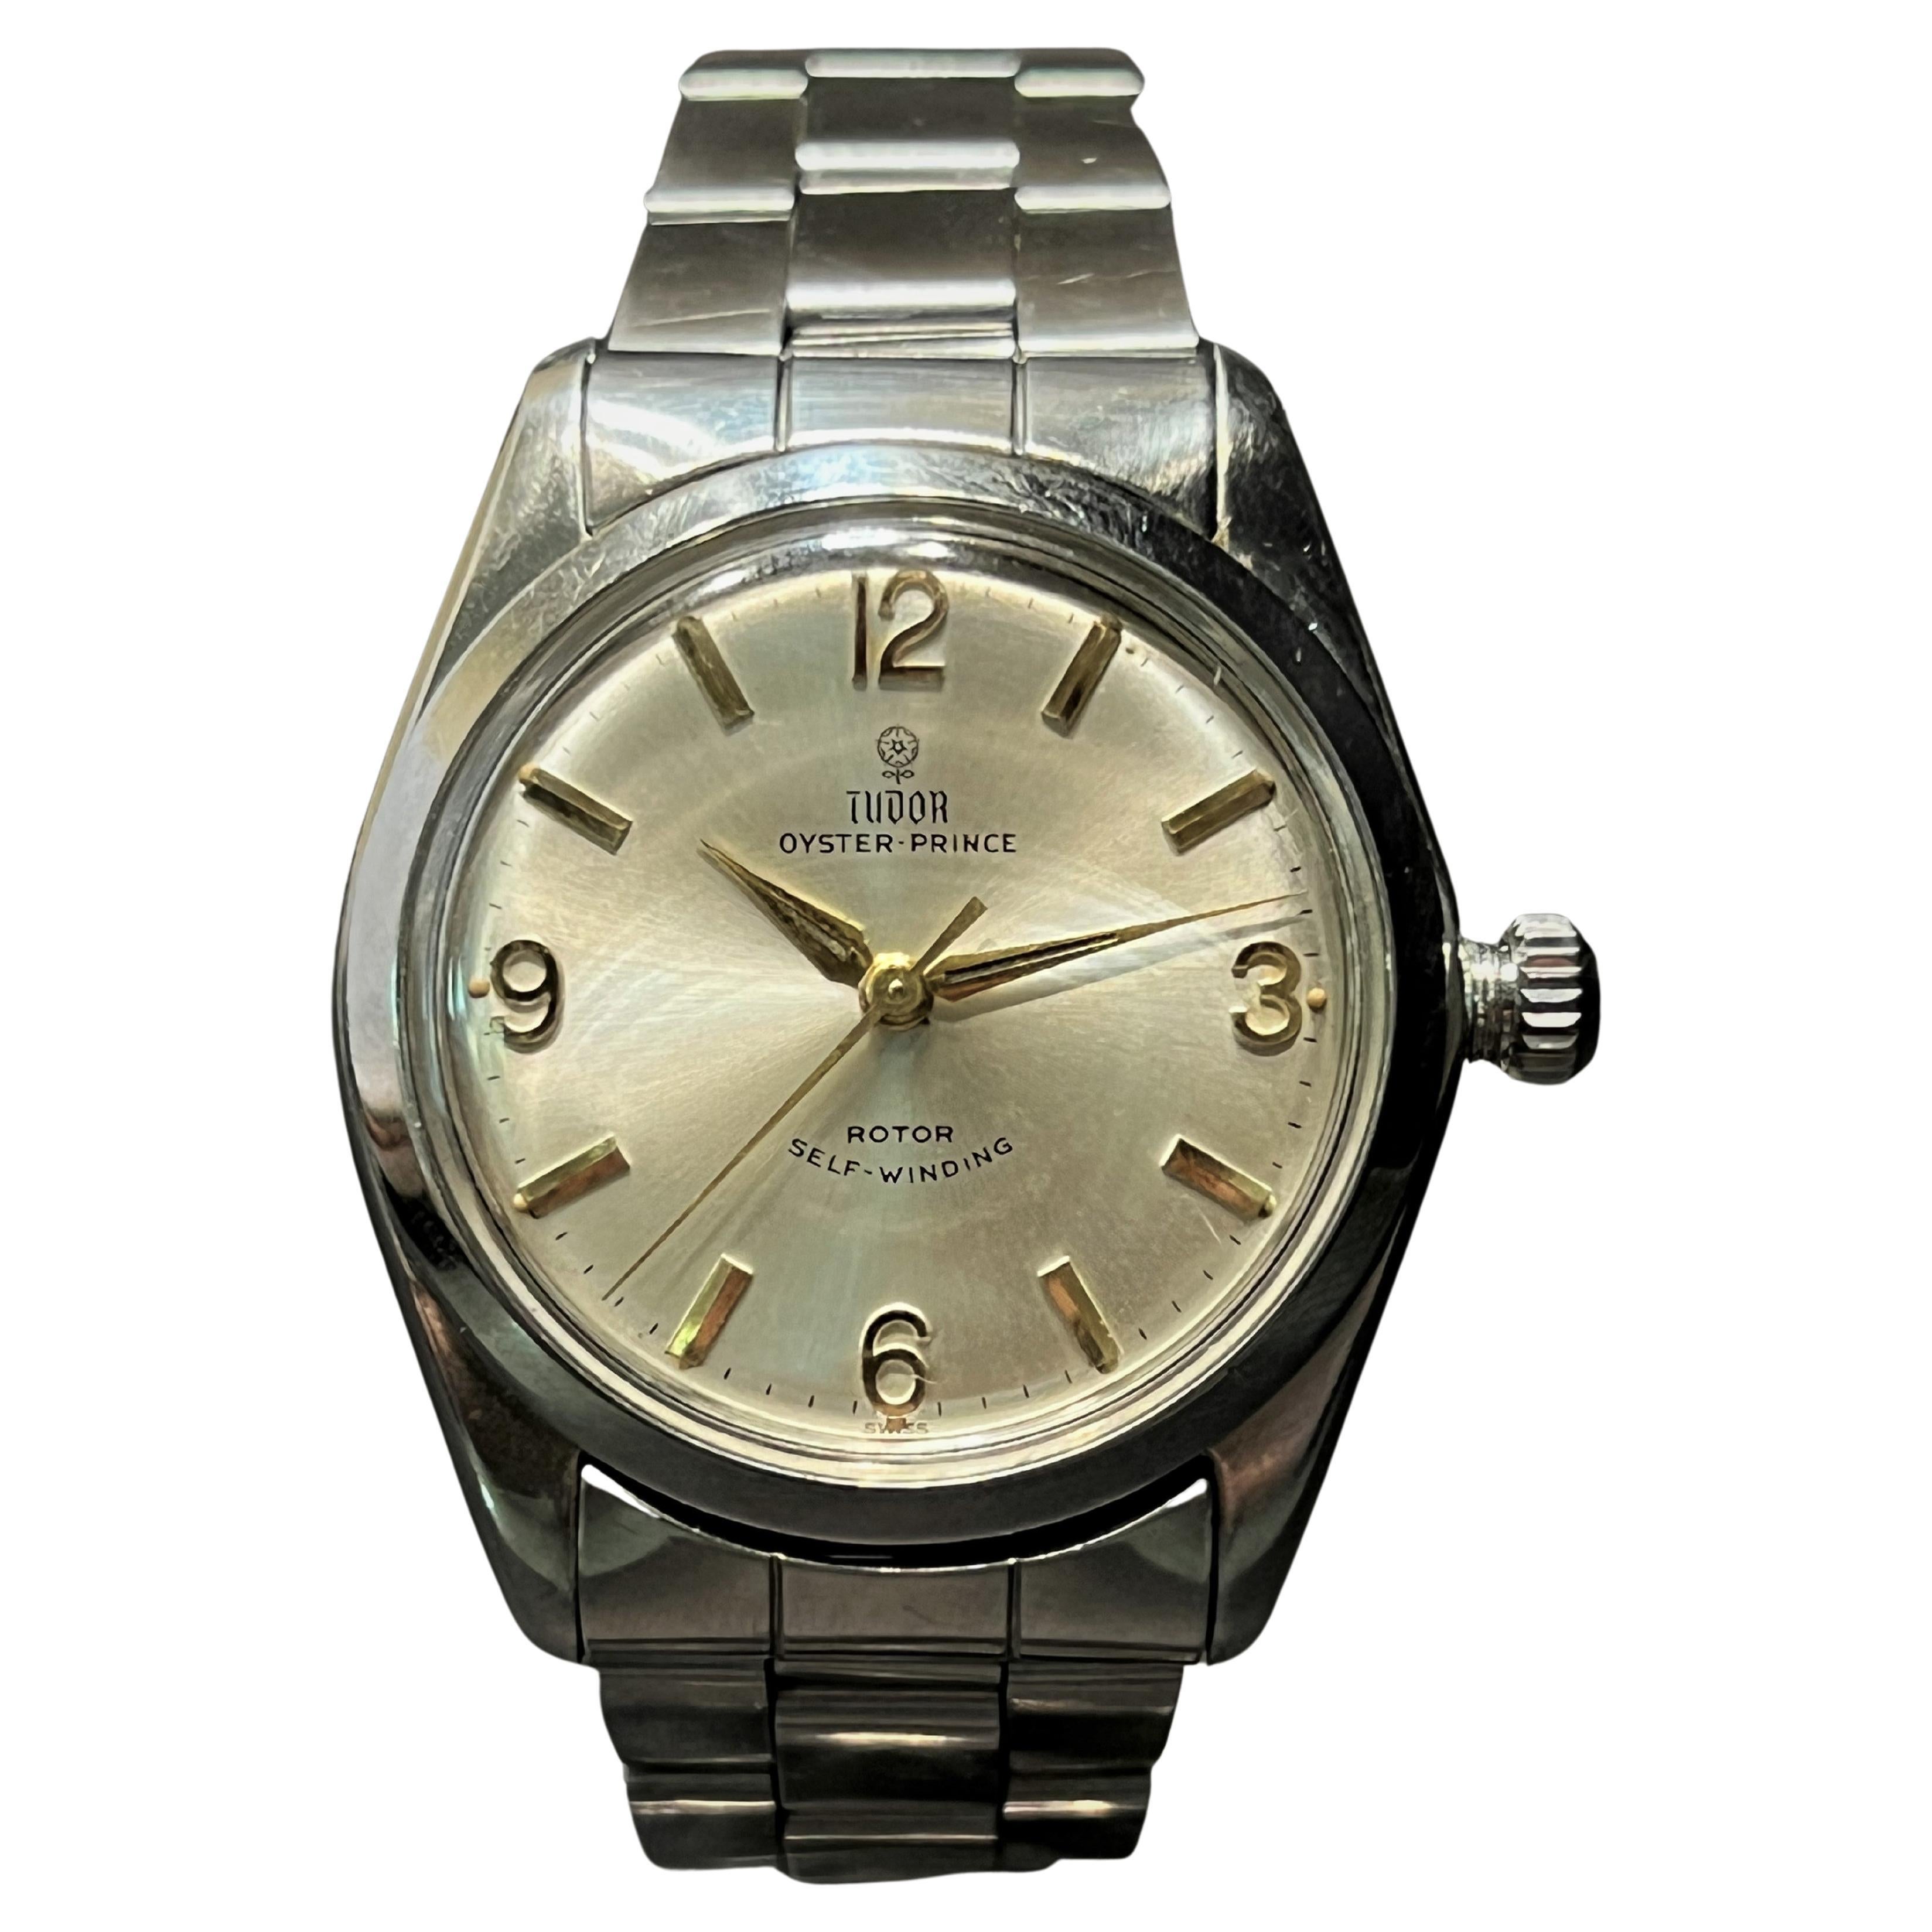 1968 Rolex Tudor Oyster Prince Stainless Watch For Sale at 1stDibs